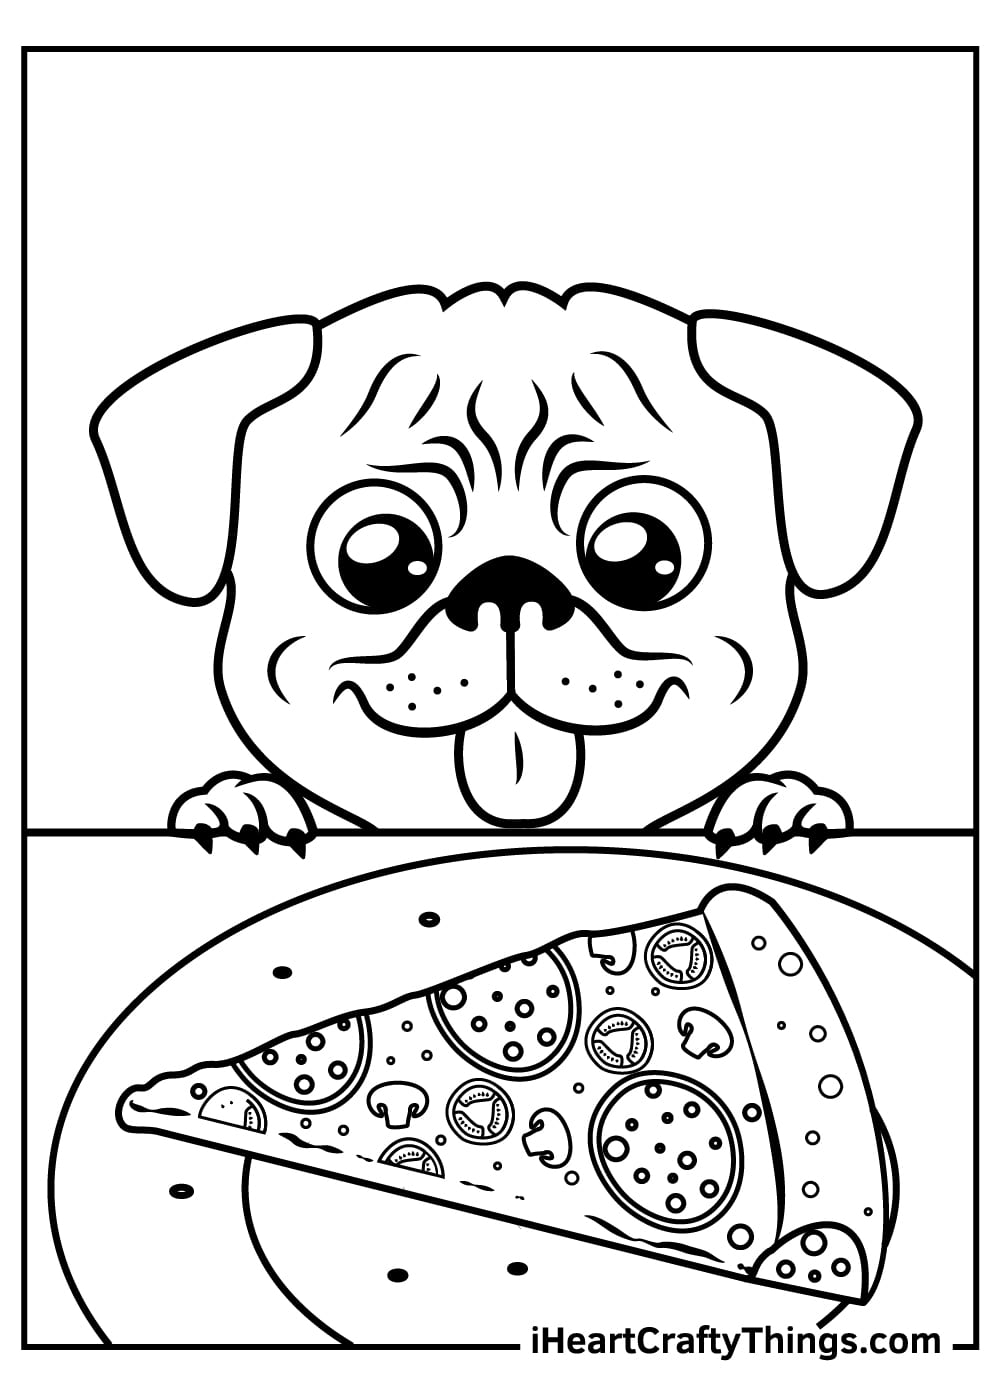 Pirate Pug Eat Pizza Coloring Free Coloring Page